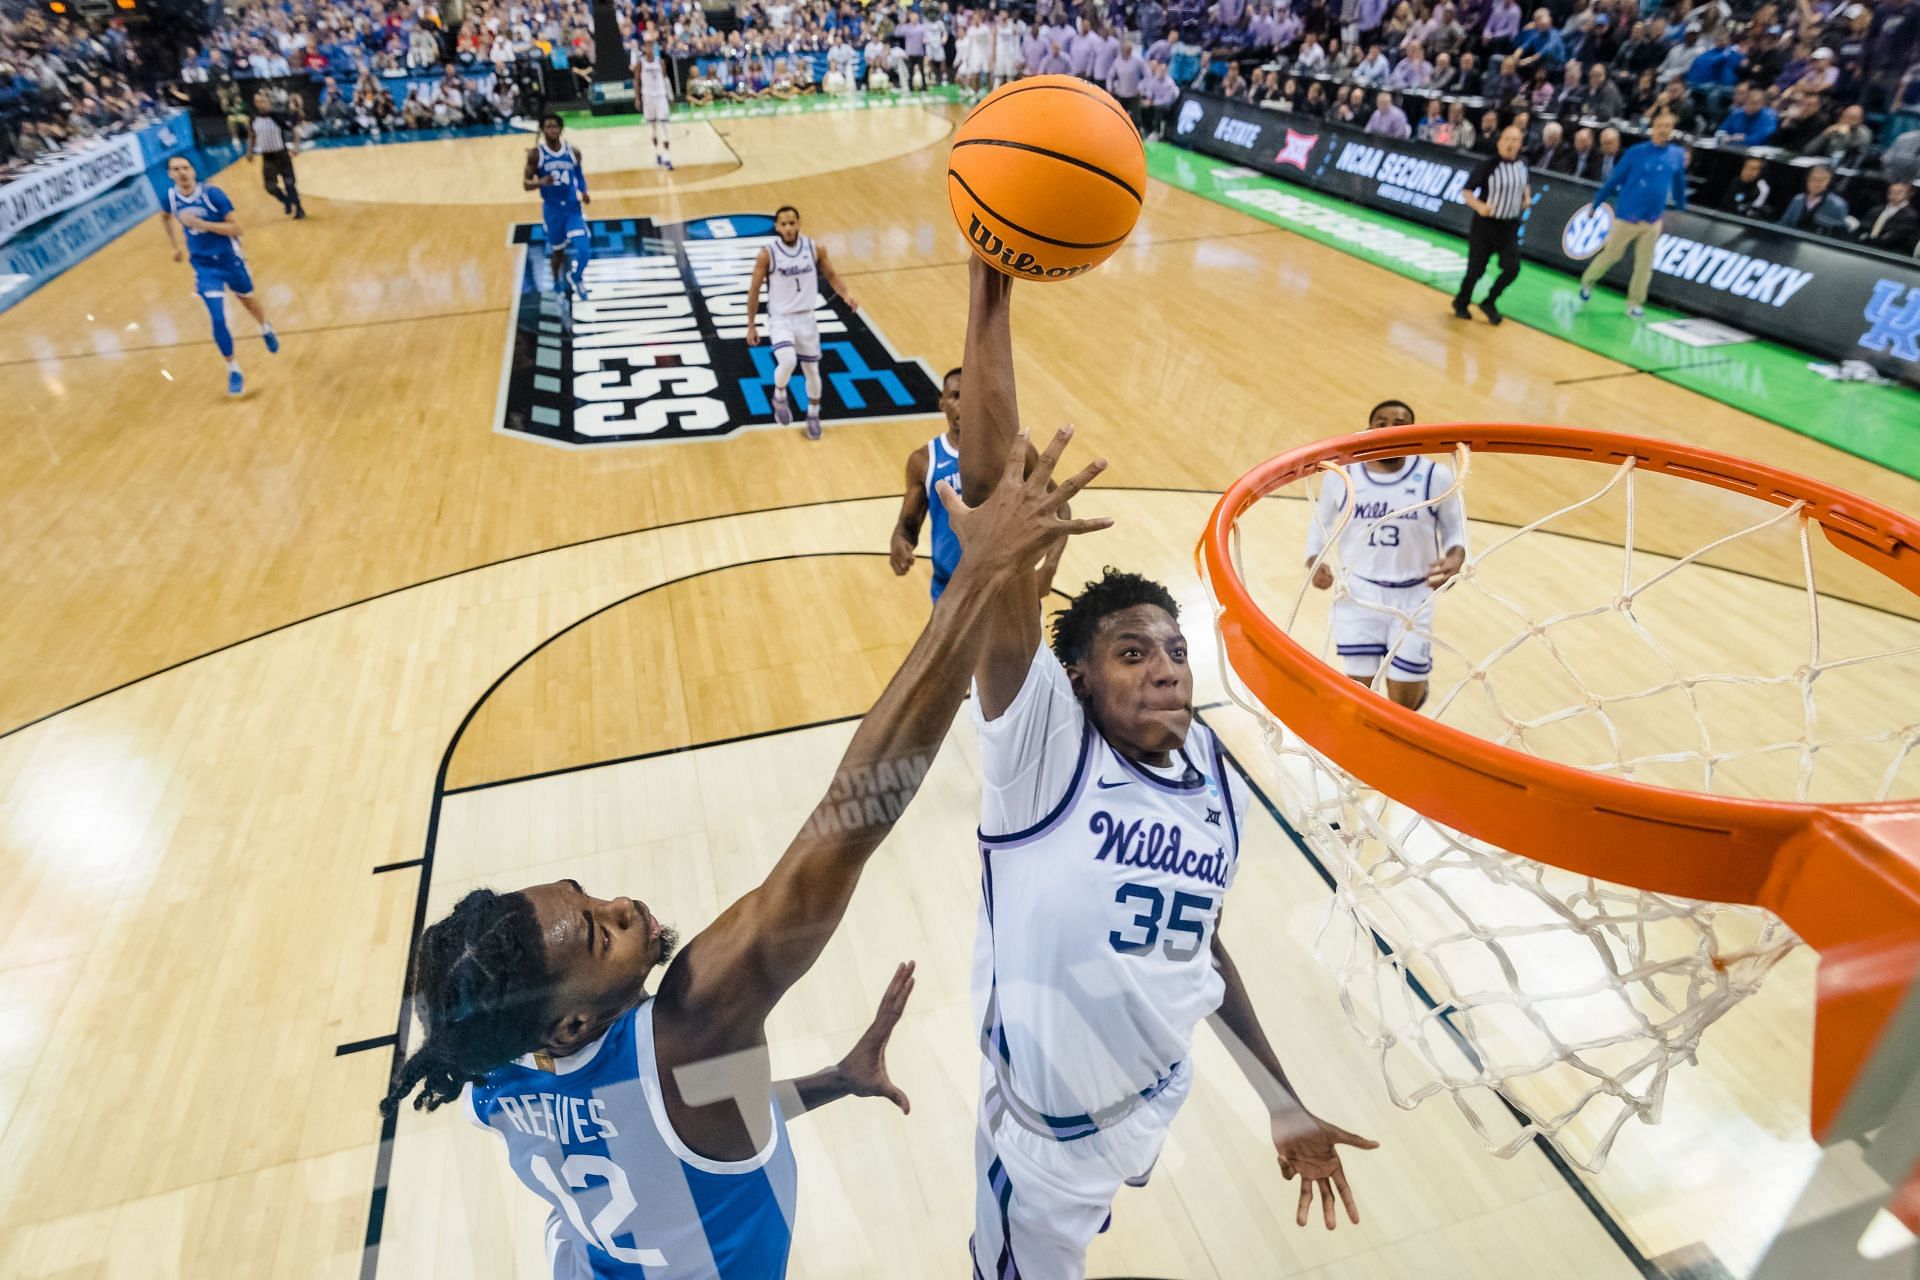 Last year, Kentucky and Kansas State played a great NCAA Tournament game in Greensboro Coliseum.